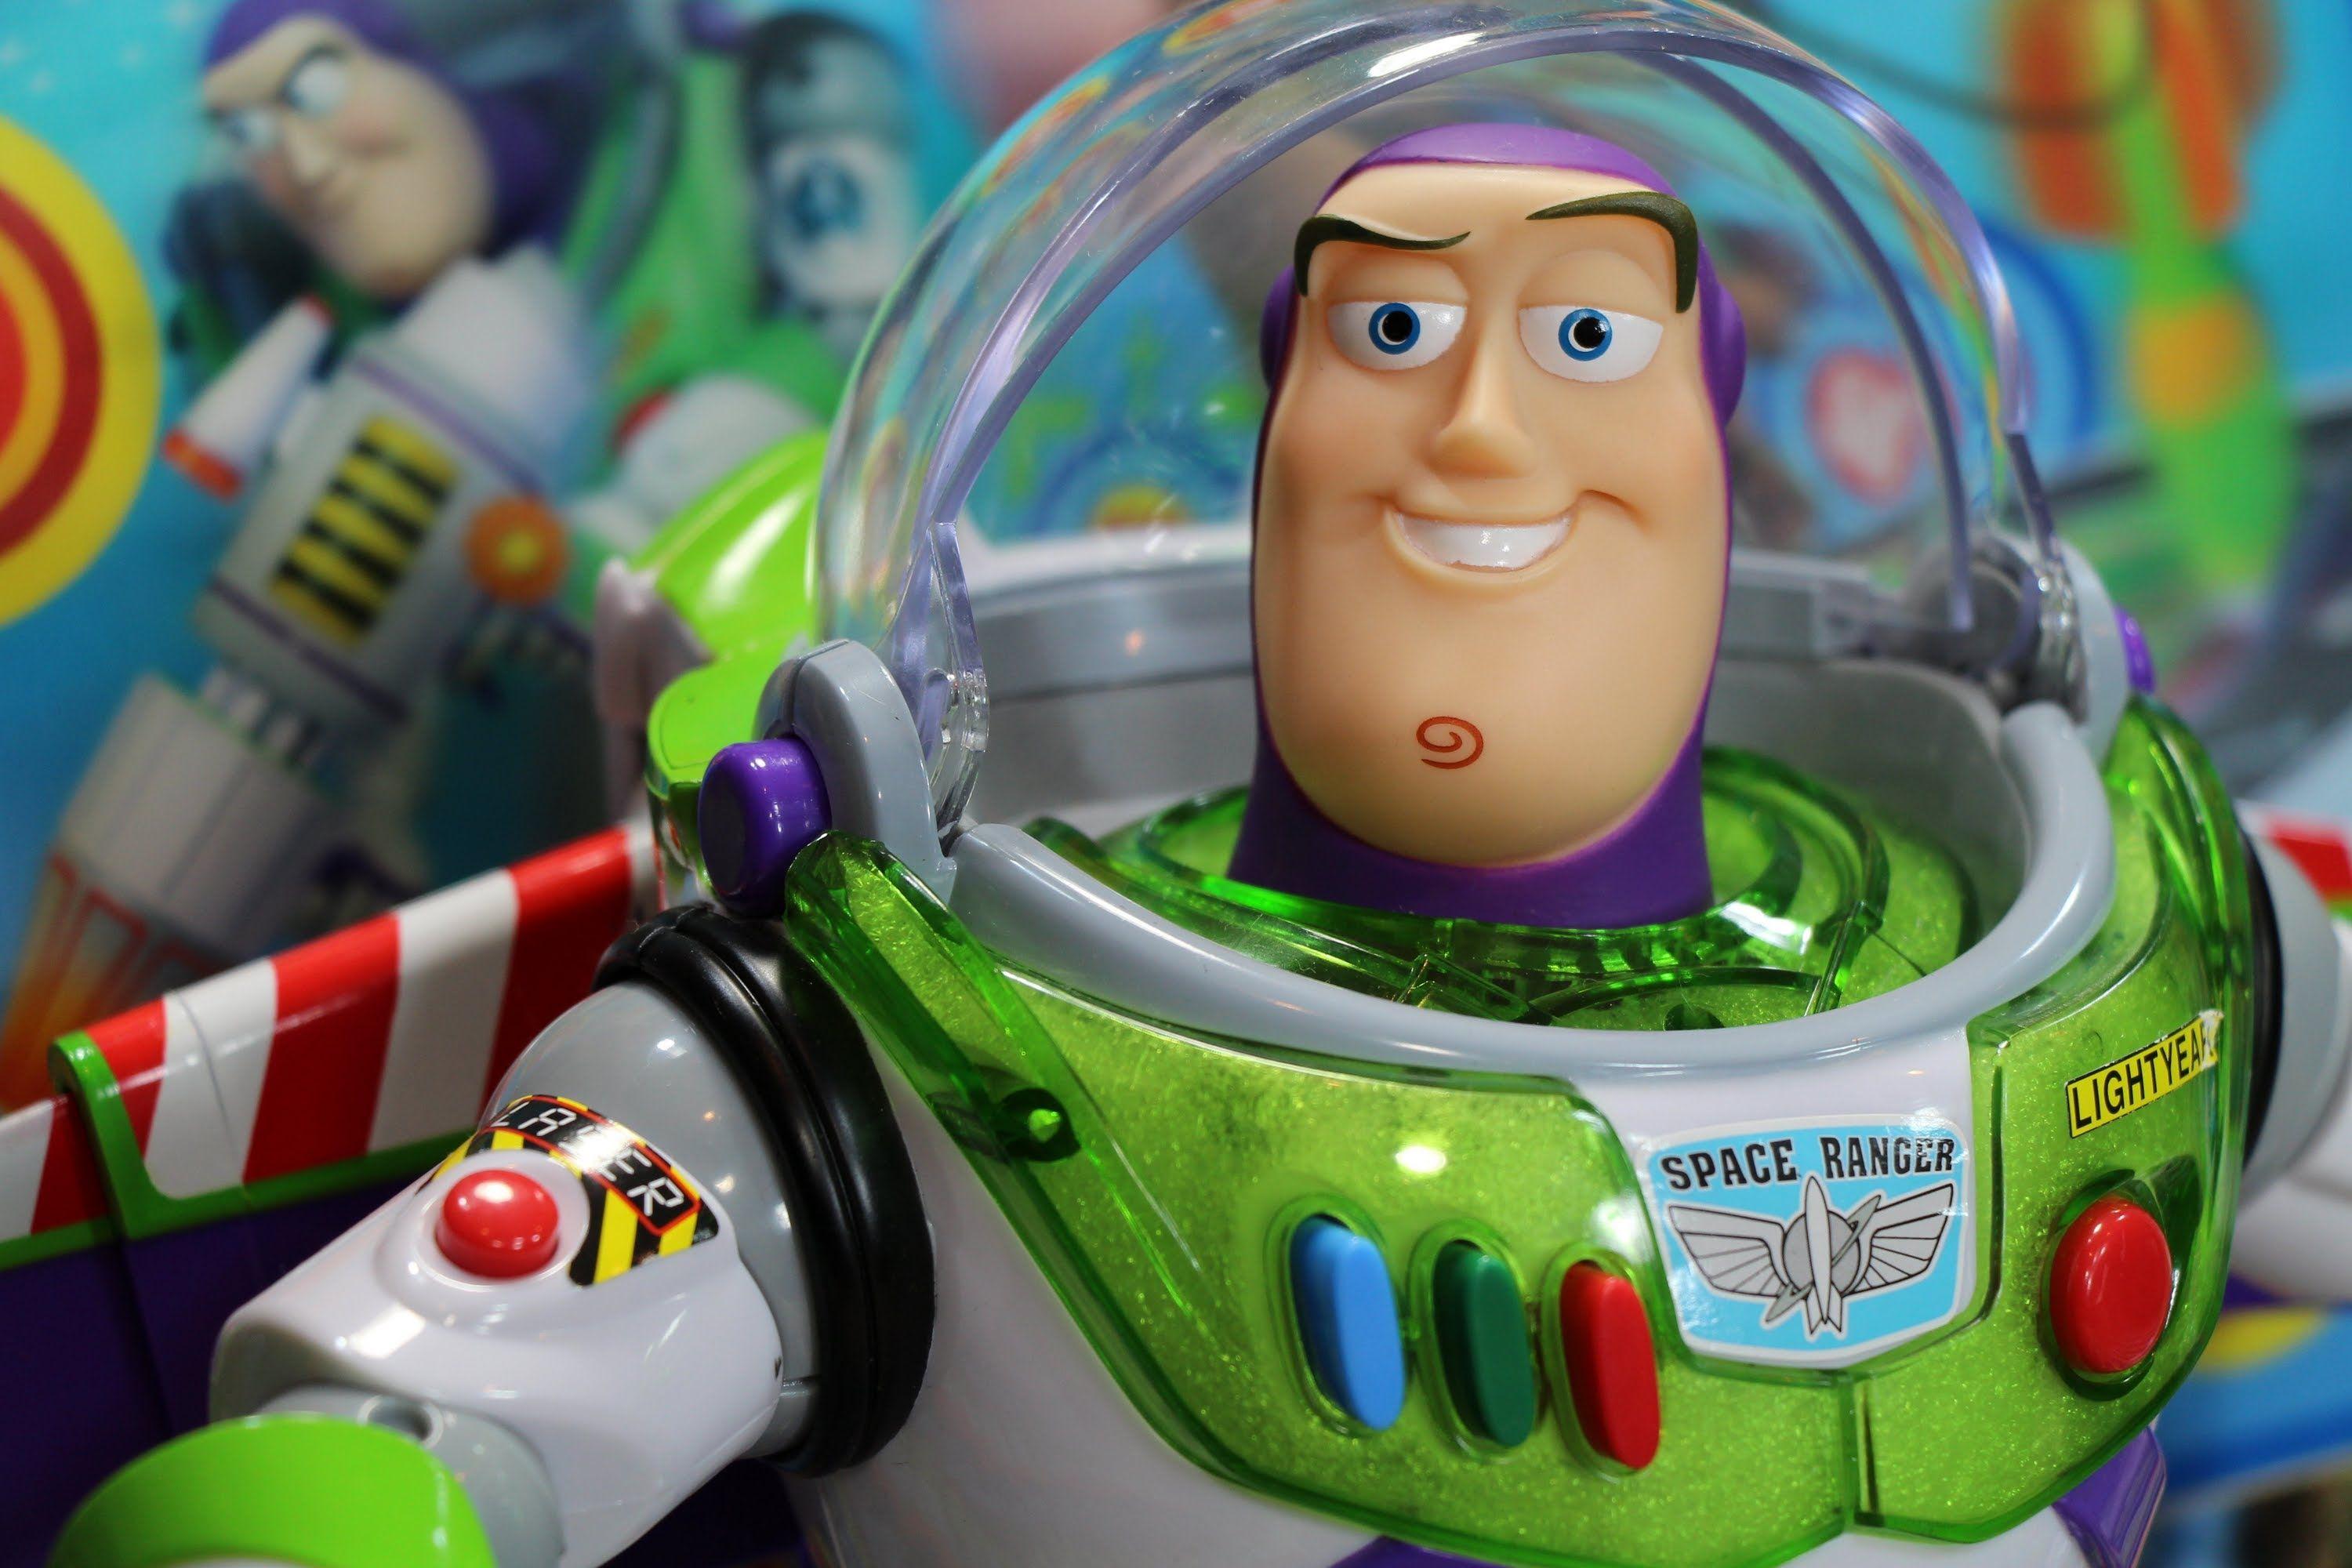 Buzz Lightyear Wallpapers Pictures - Yoanu 